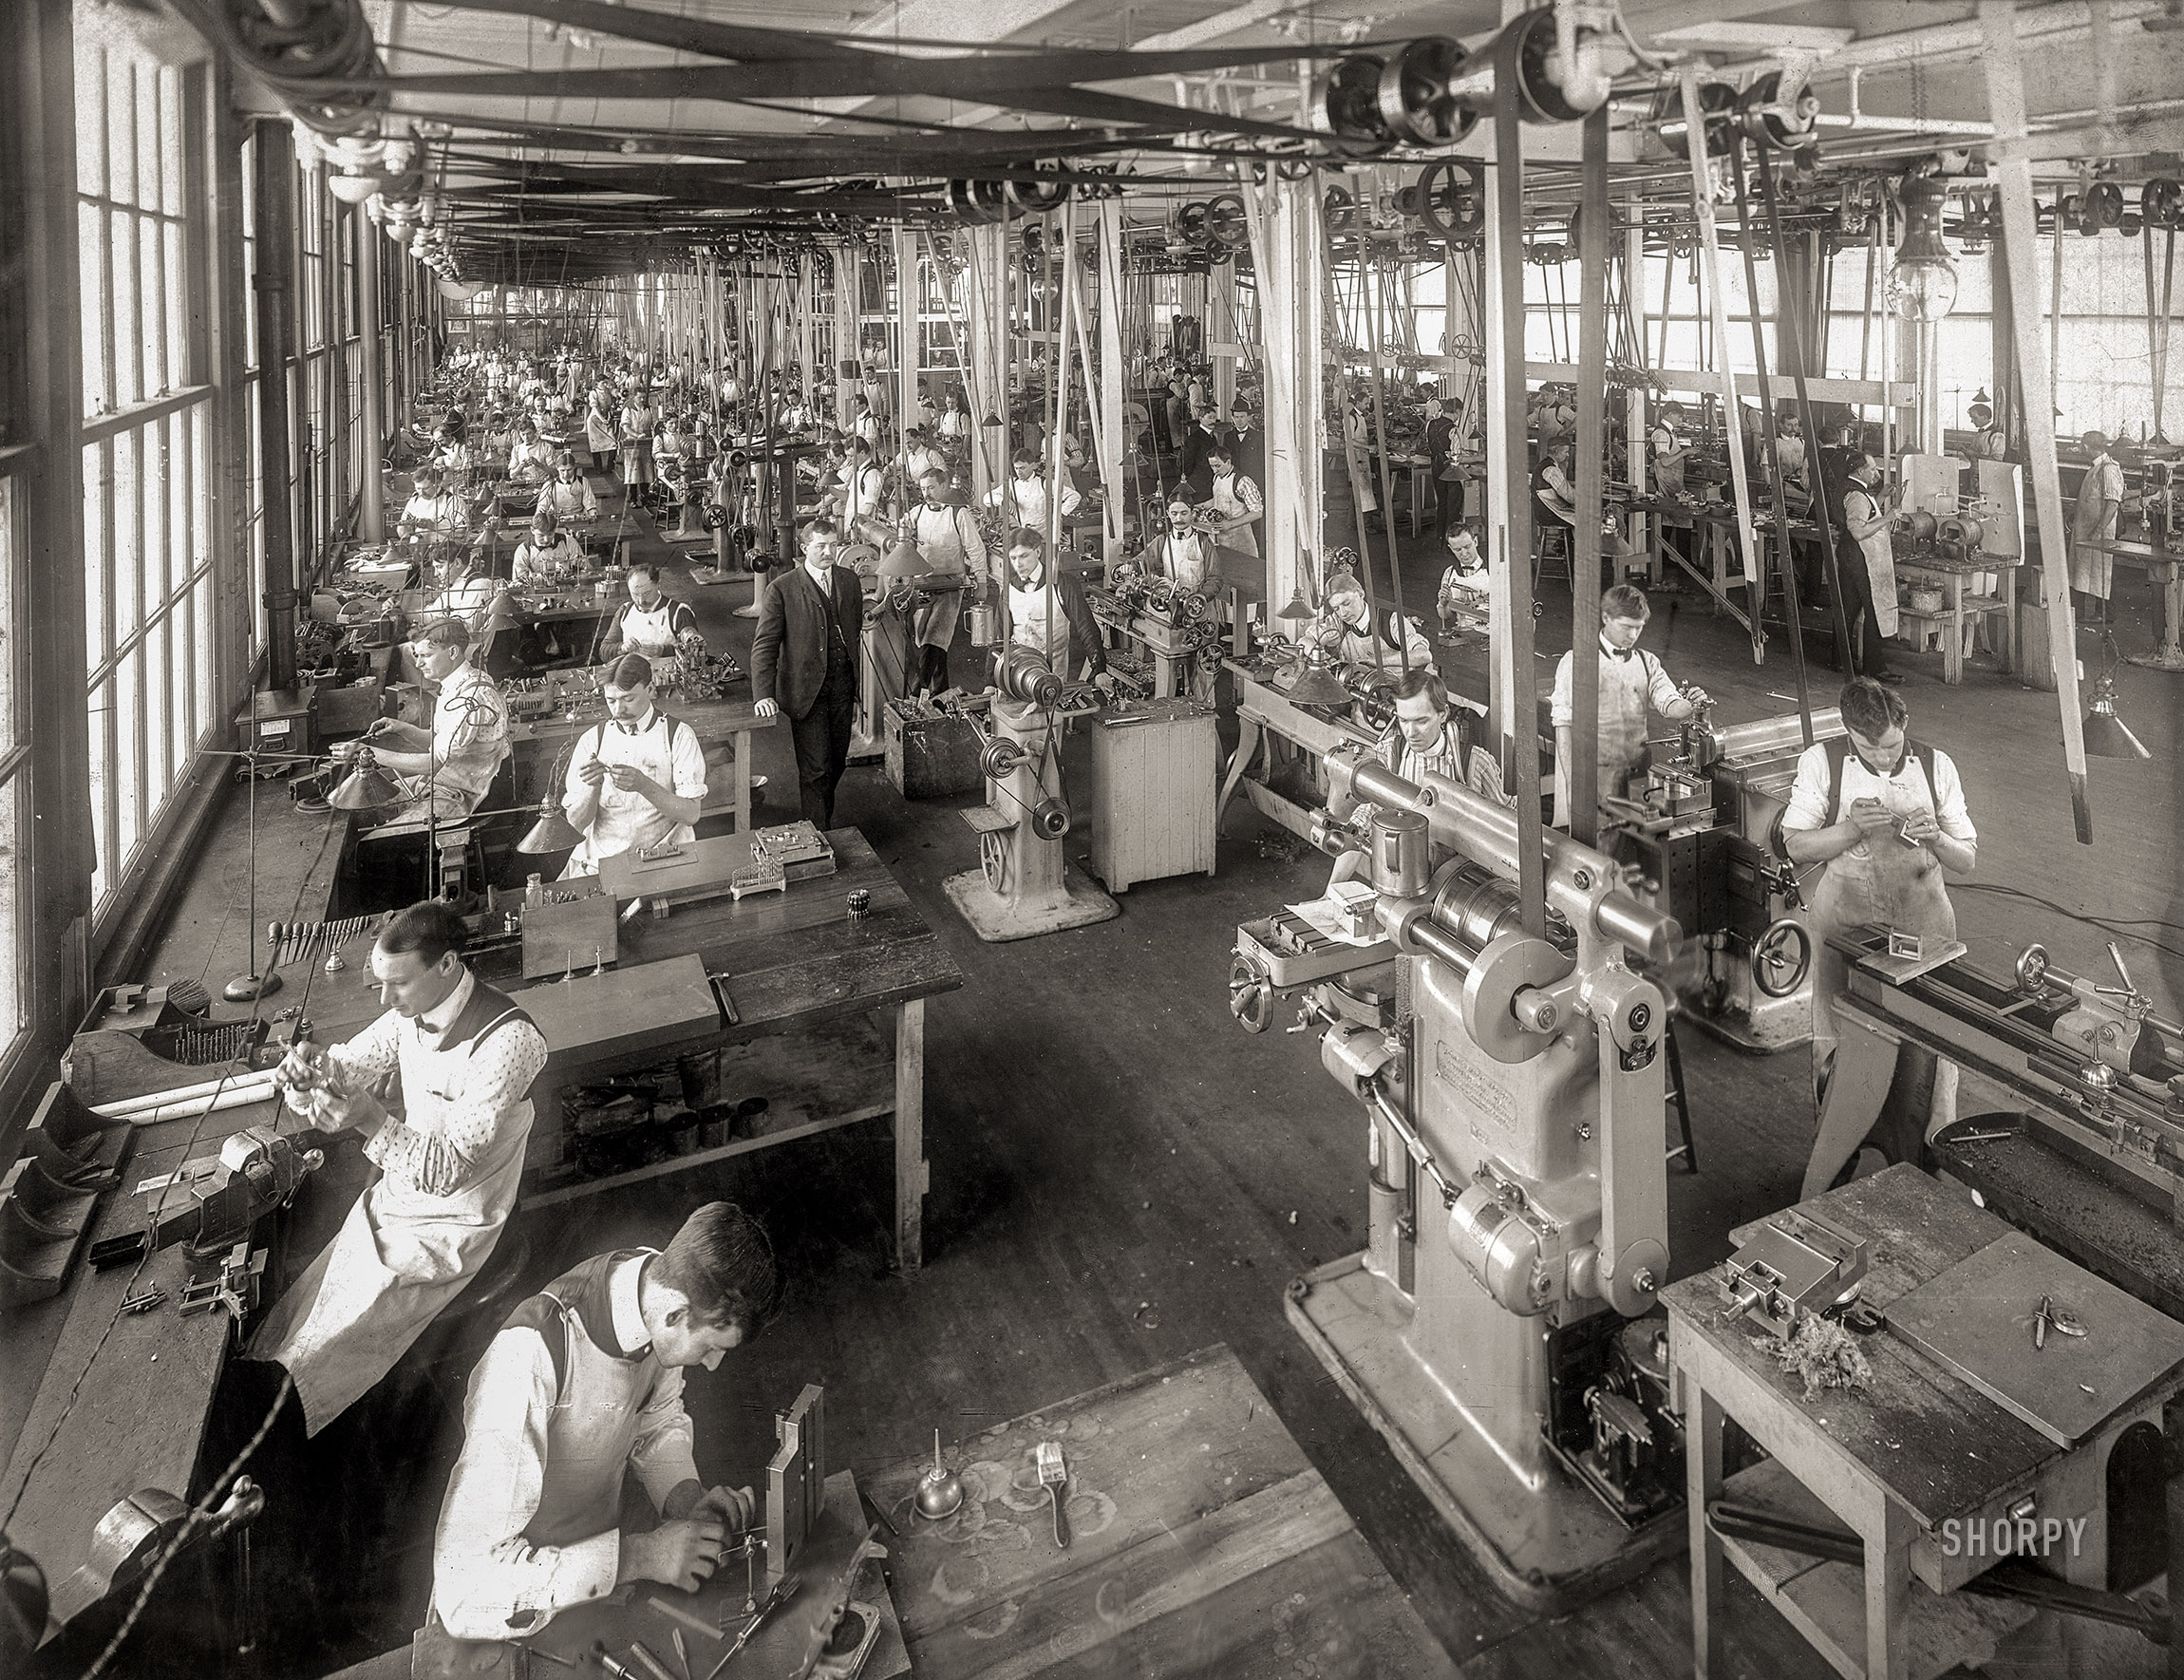 Dayton, Ohio, 1904. "Tool room of the National Cash Register Co." A case study in belt-and-pulley power transmission. George R. Lawrence Co. photo. View full size.